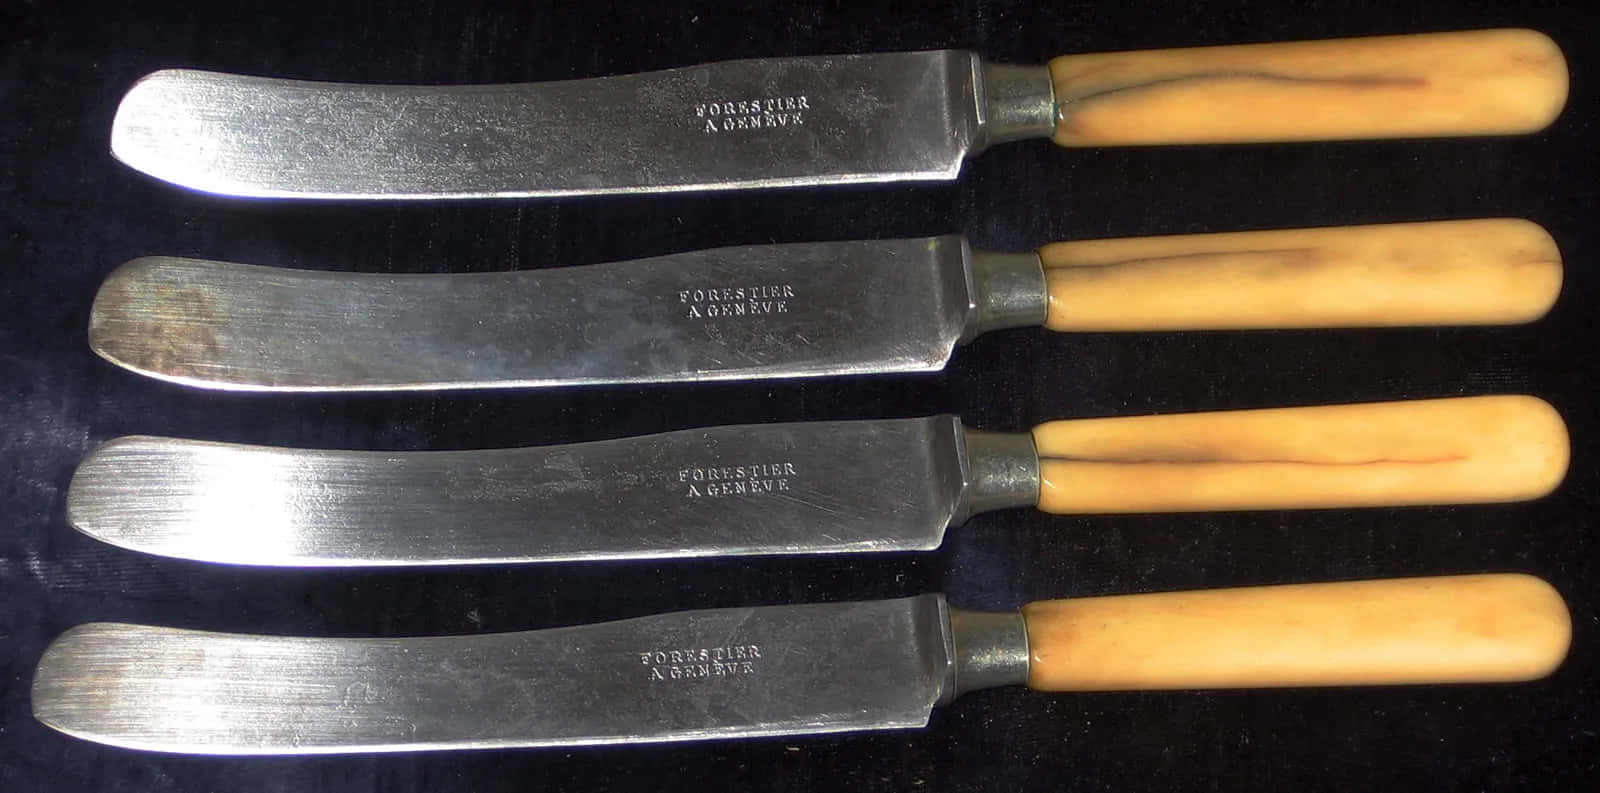 An assortment of sharp and stylish chef knives